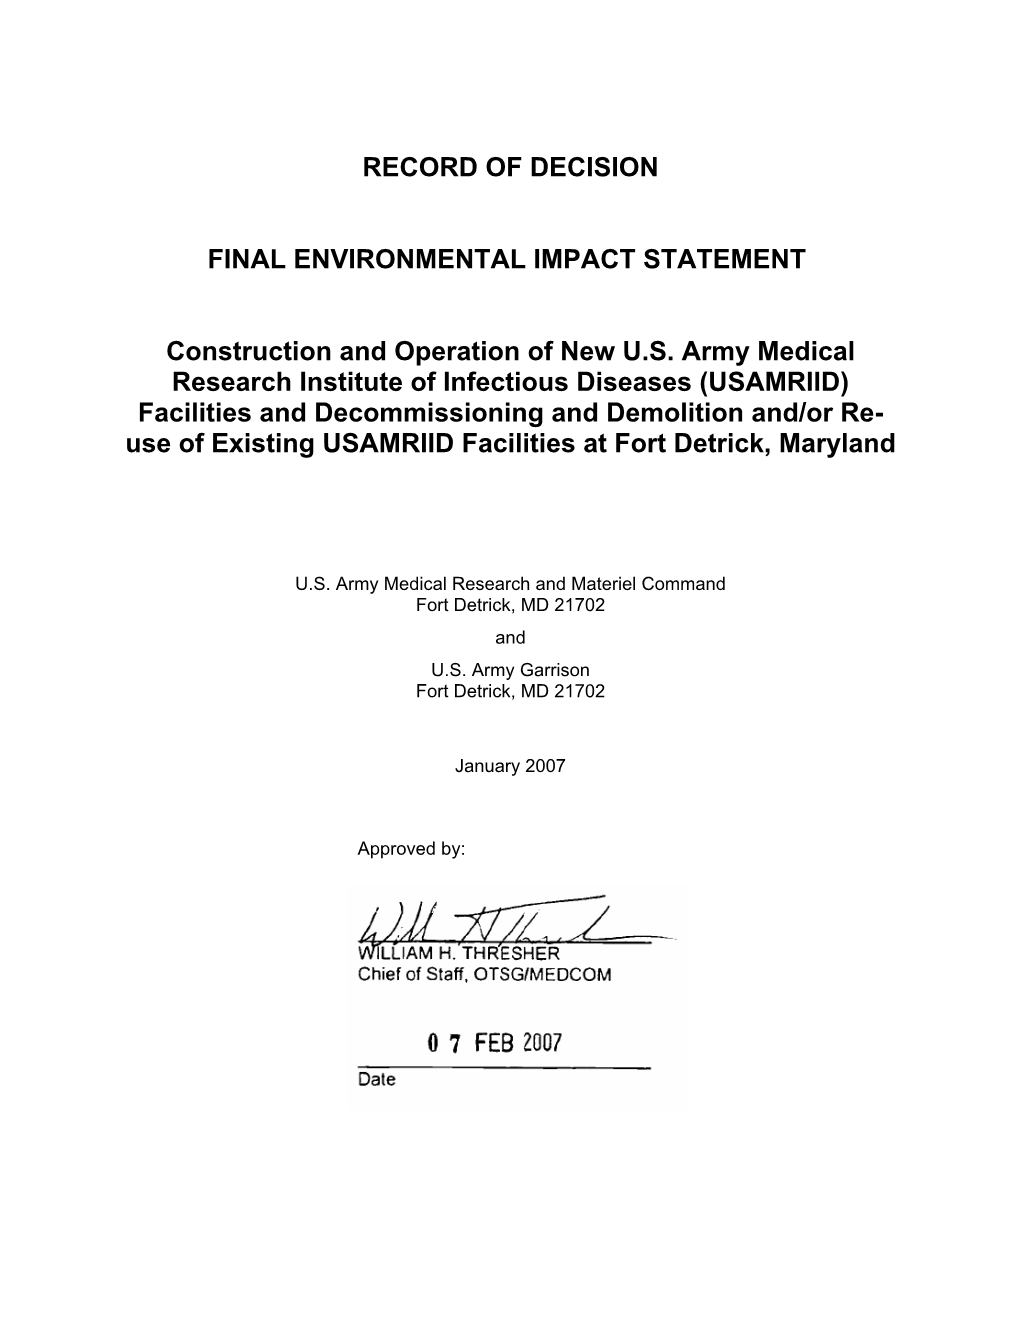 US Dept of the Army, Record of Decision, Final Environmental